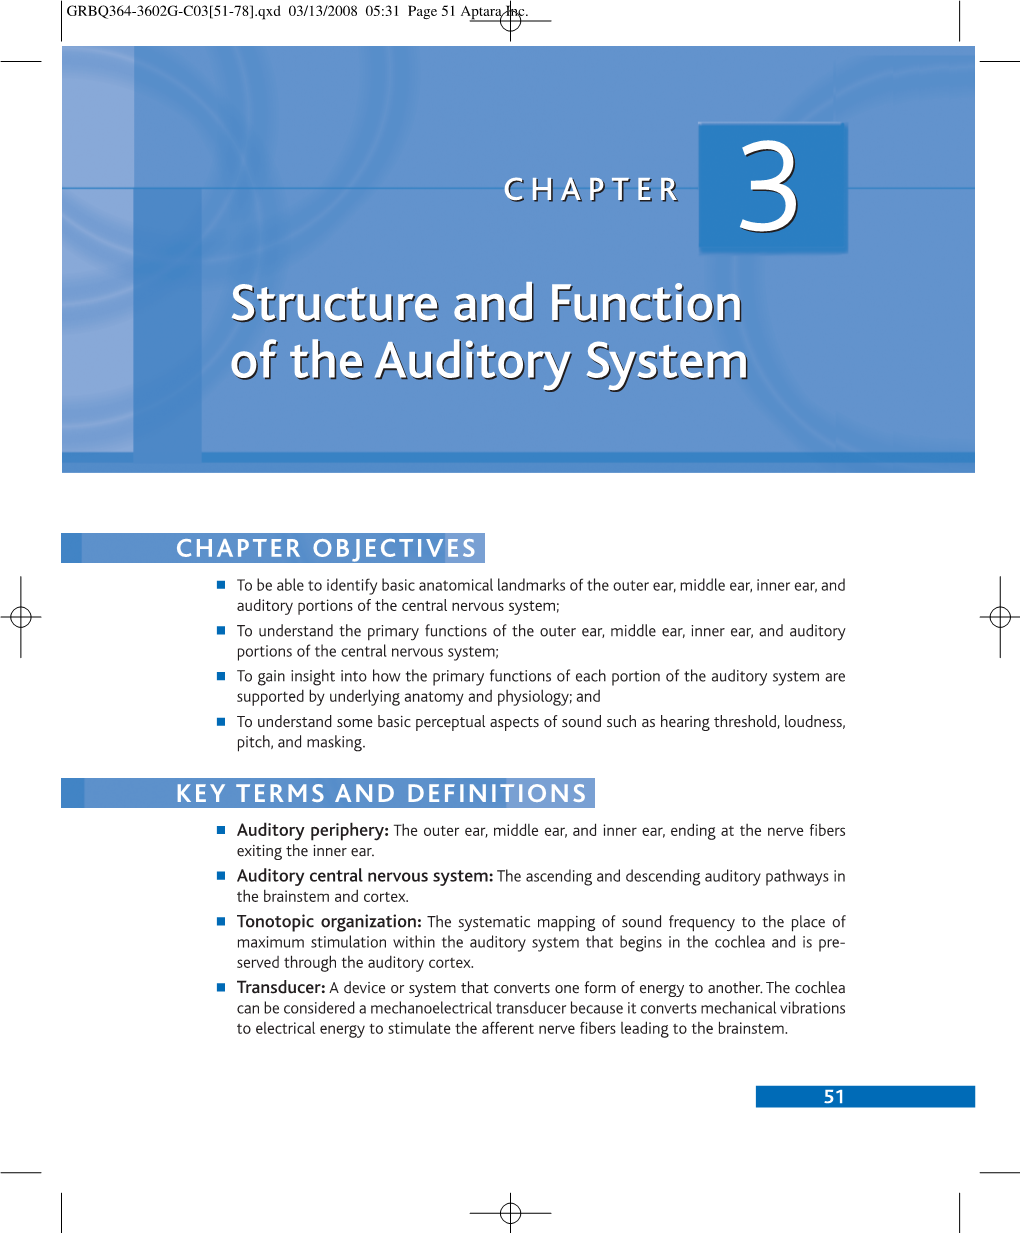 CHAPTER 3 Structure and Function of the Auditory System